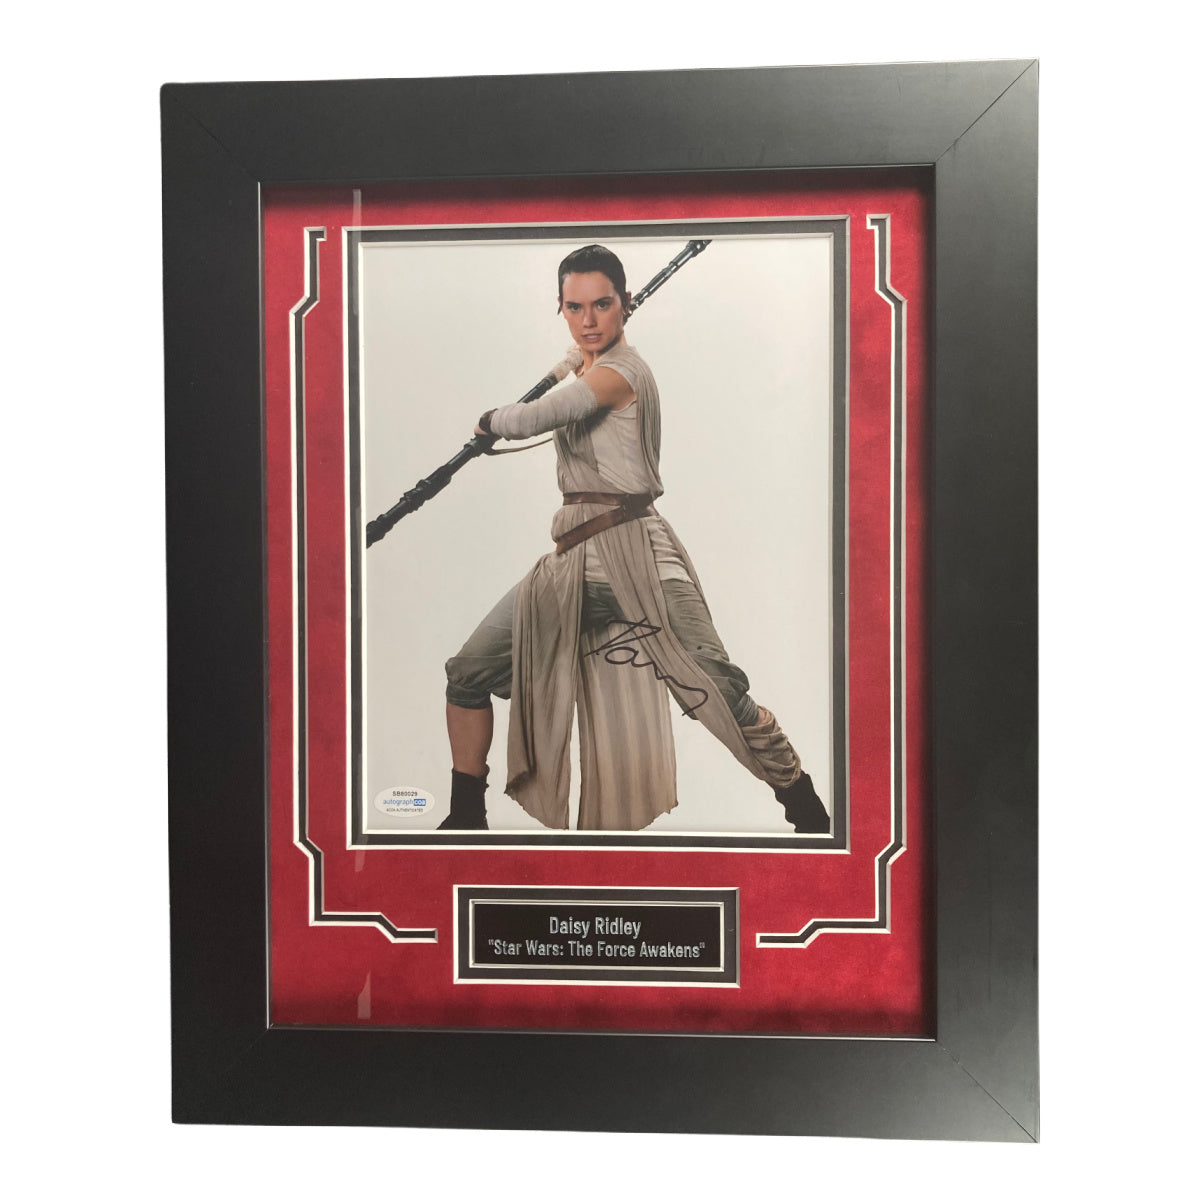 Daisy Ridley Signed 8x10 Photo Star Wars Rey Autographed ACOA